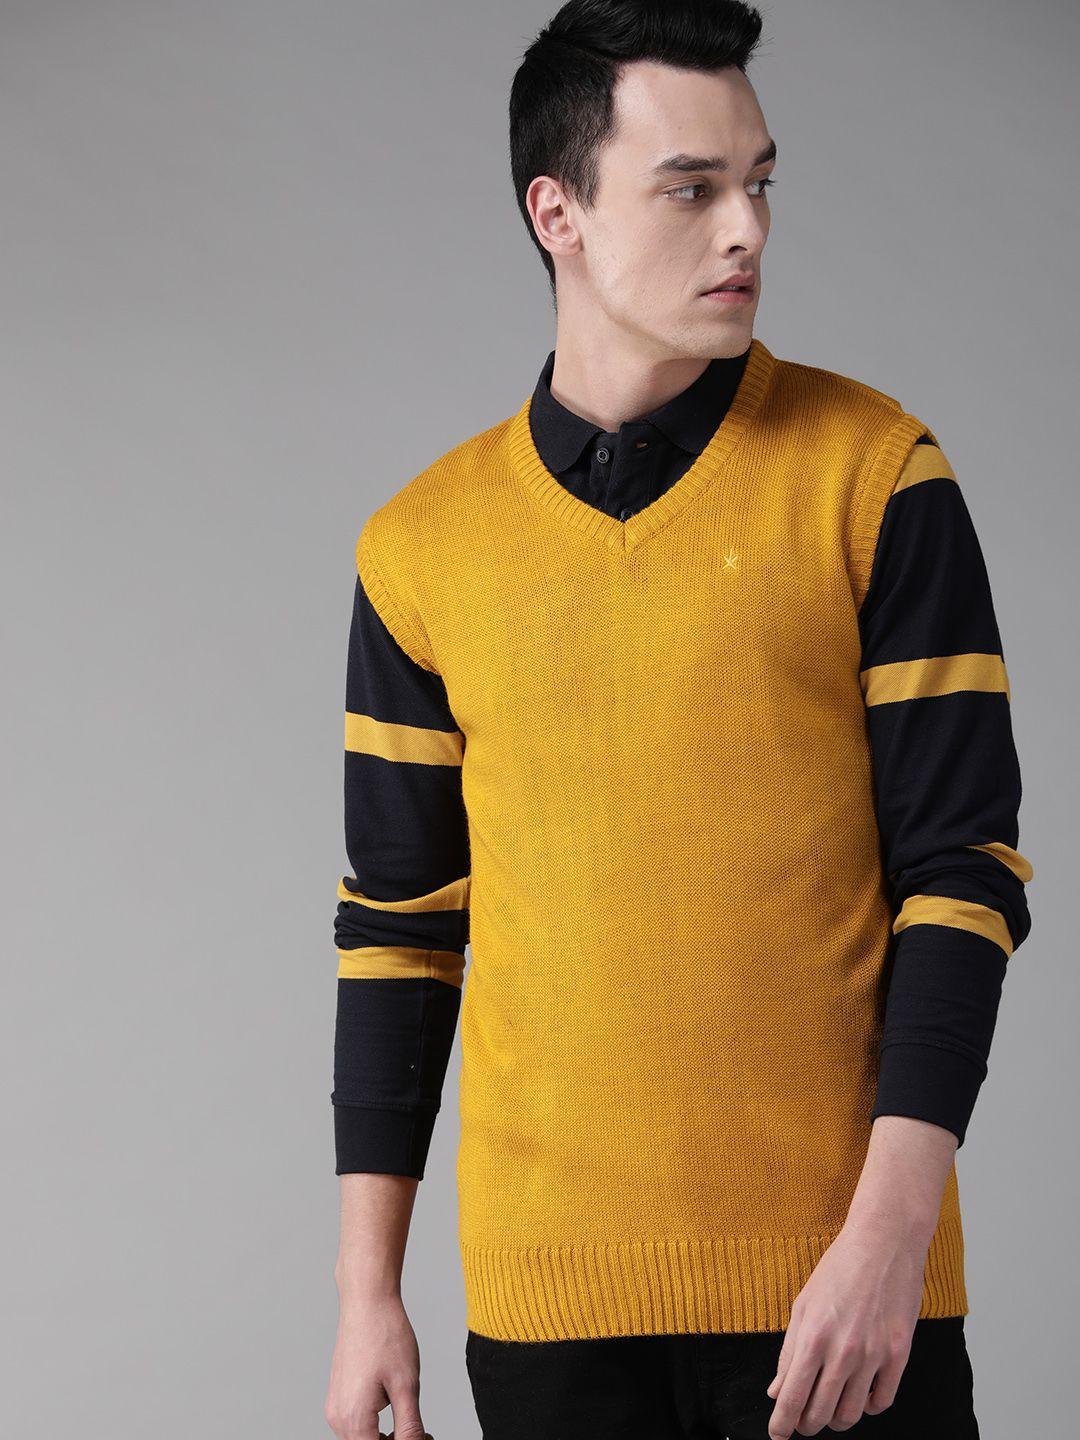 the-roadster-lifestyle-co-men-mustard-yellow-solid-sweater-vest